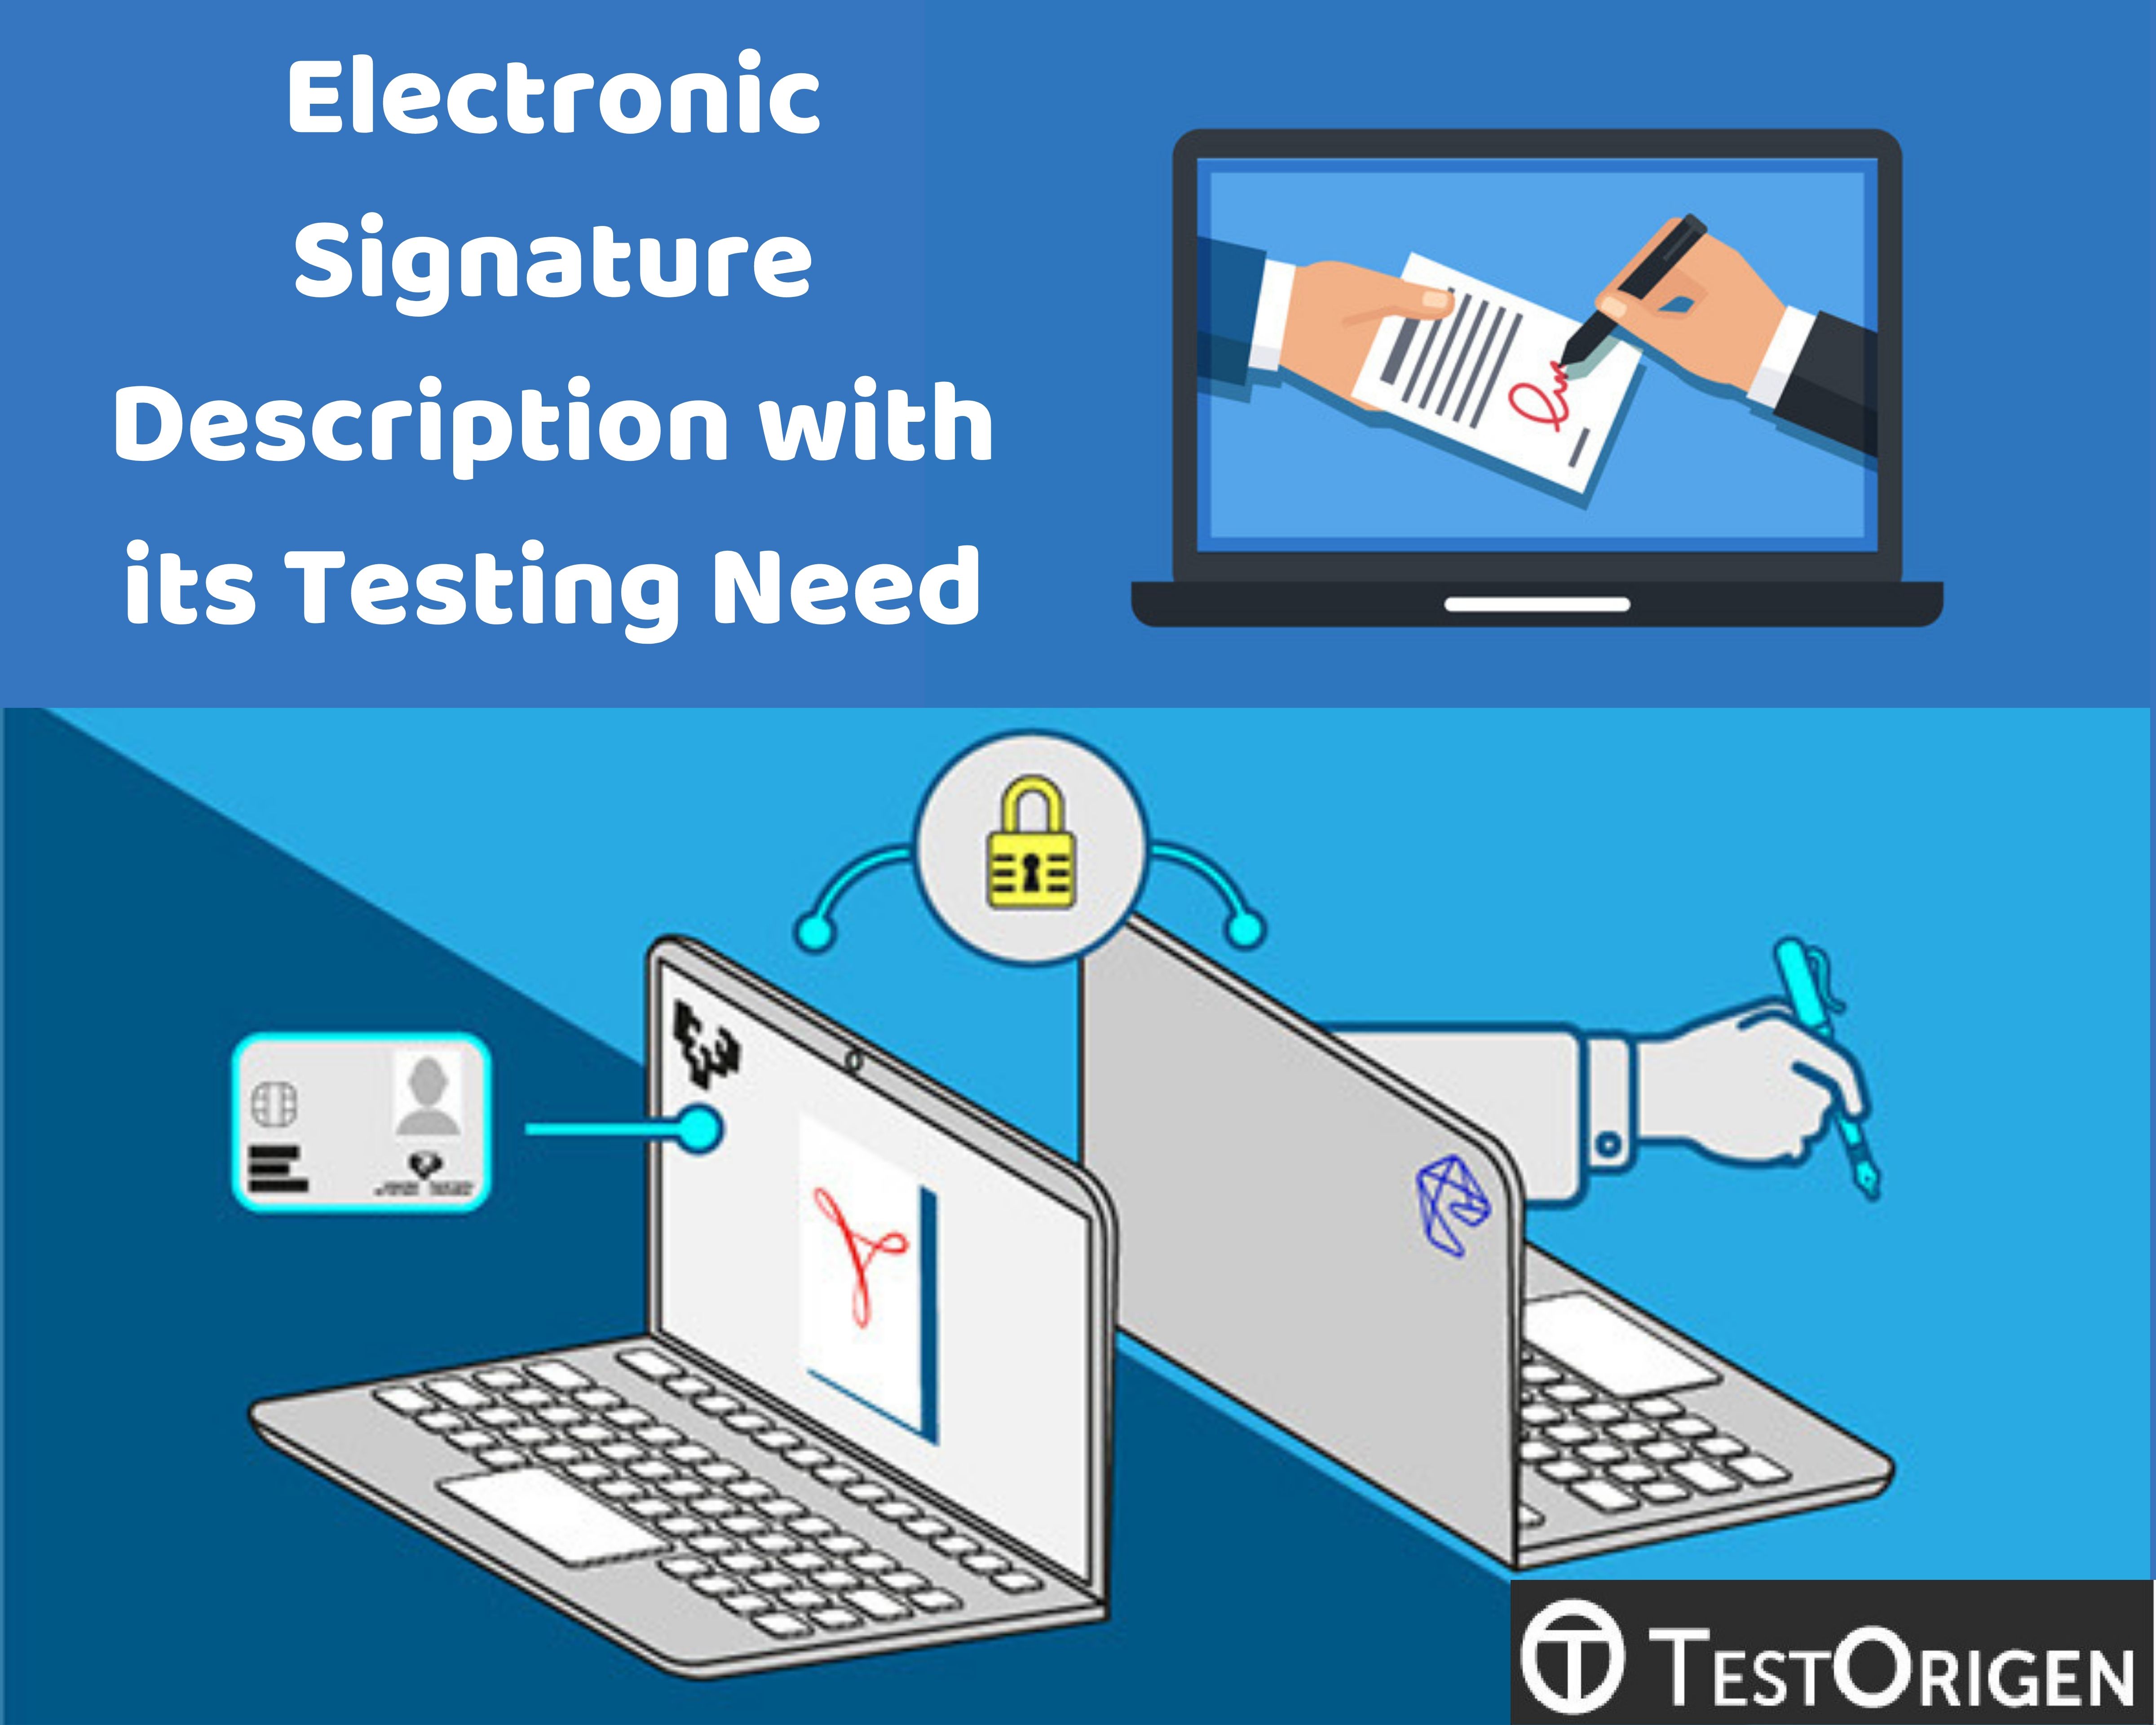 Electronic Signature Description with its Testing Need